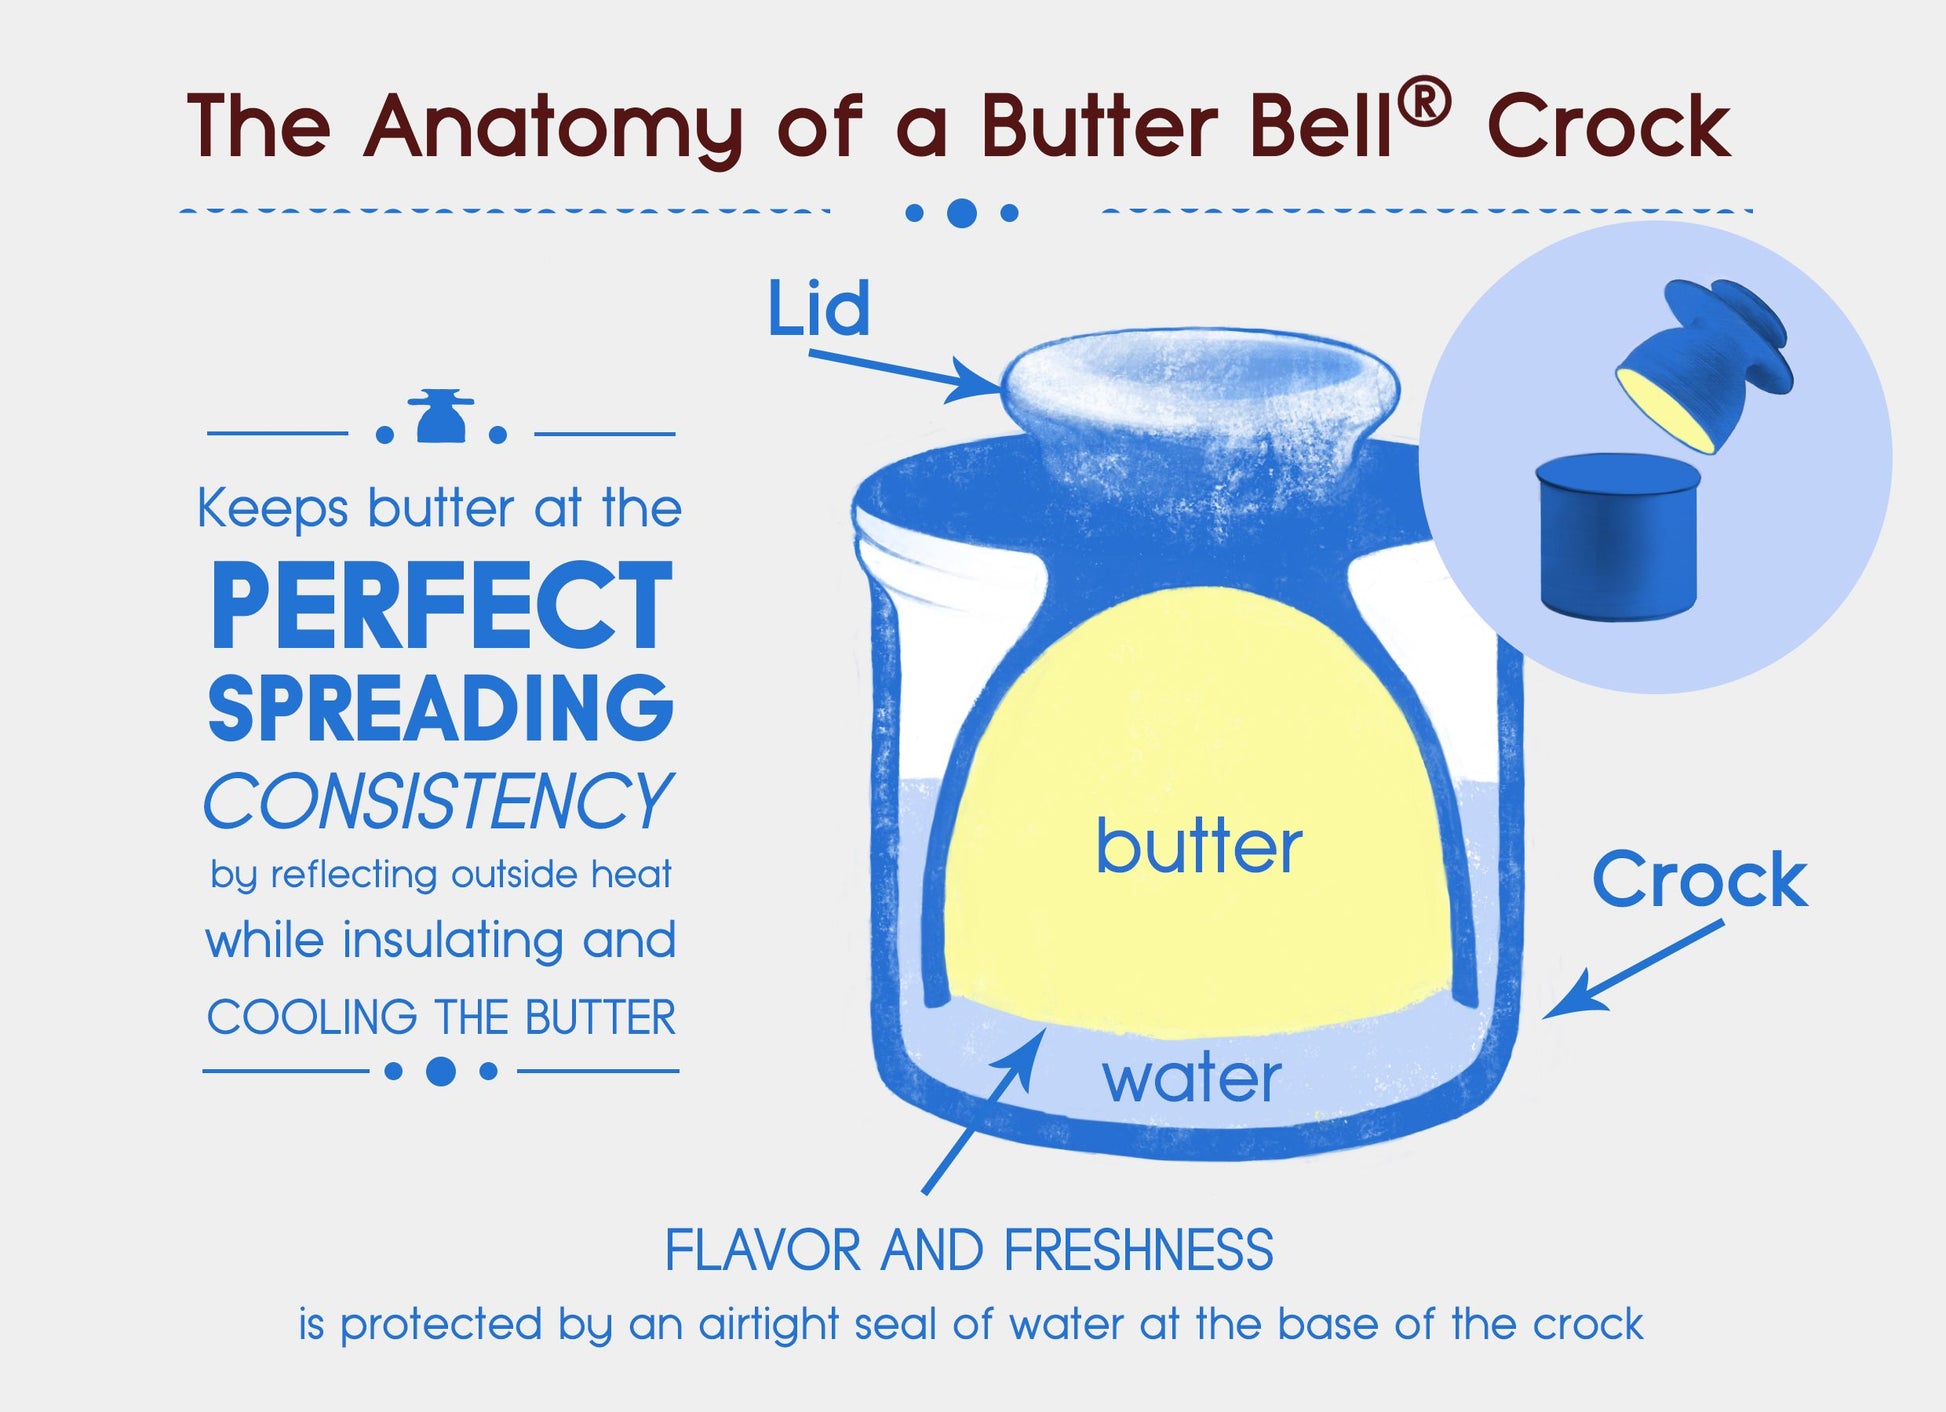 The anatomy of the Butter Bell, showing how to use it.